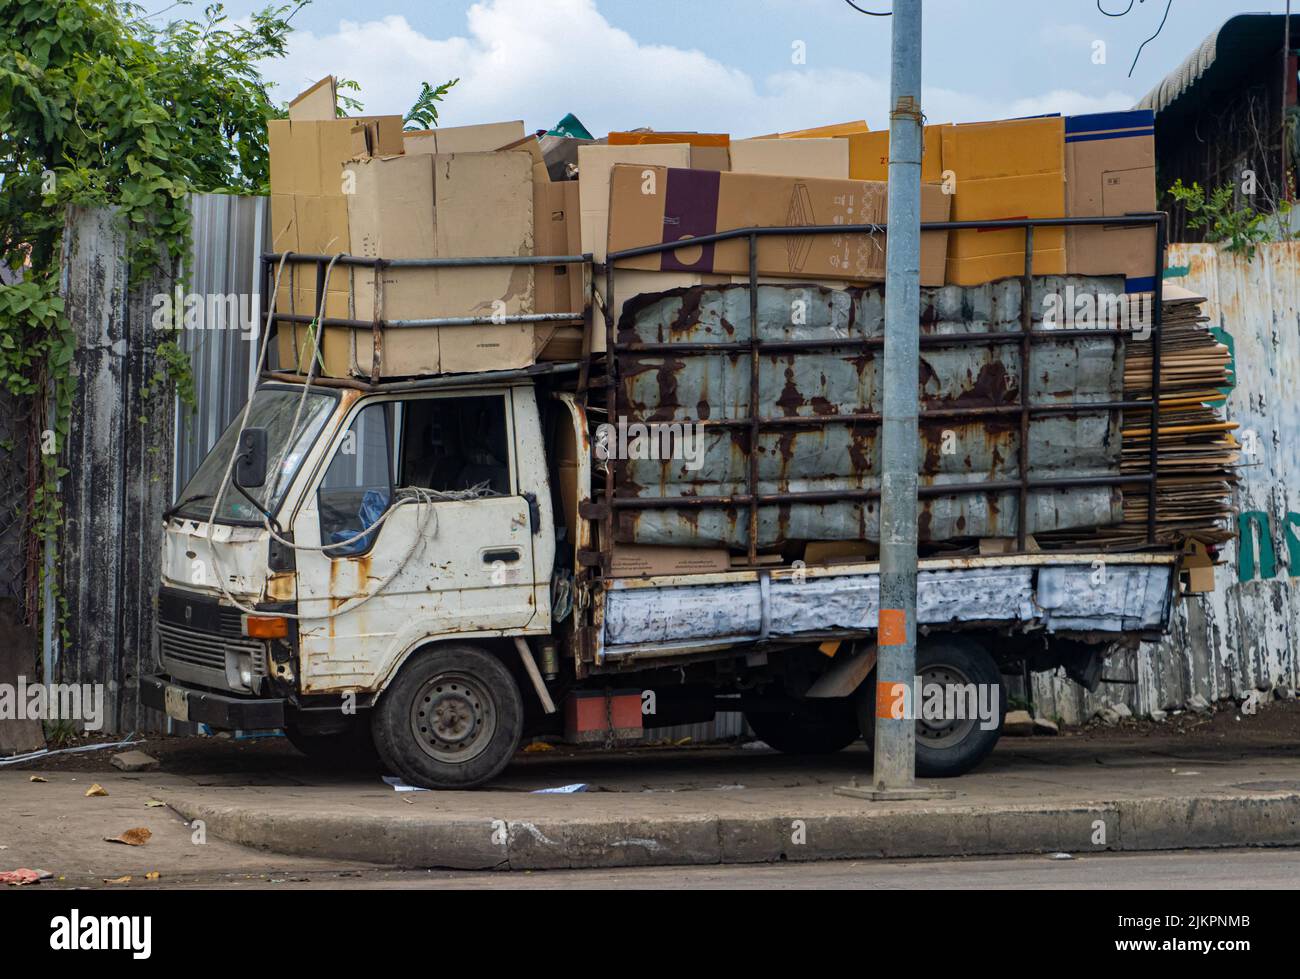 An old truck loaded with cardboard is parked on the sidewalk Stock Photo